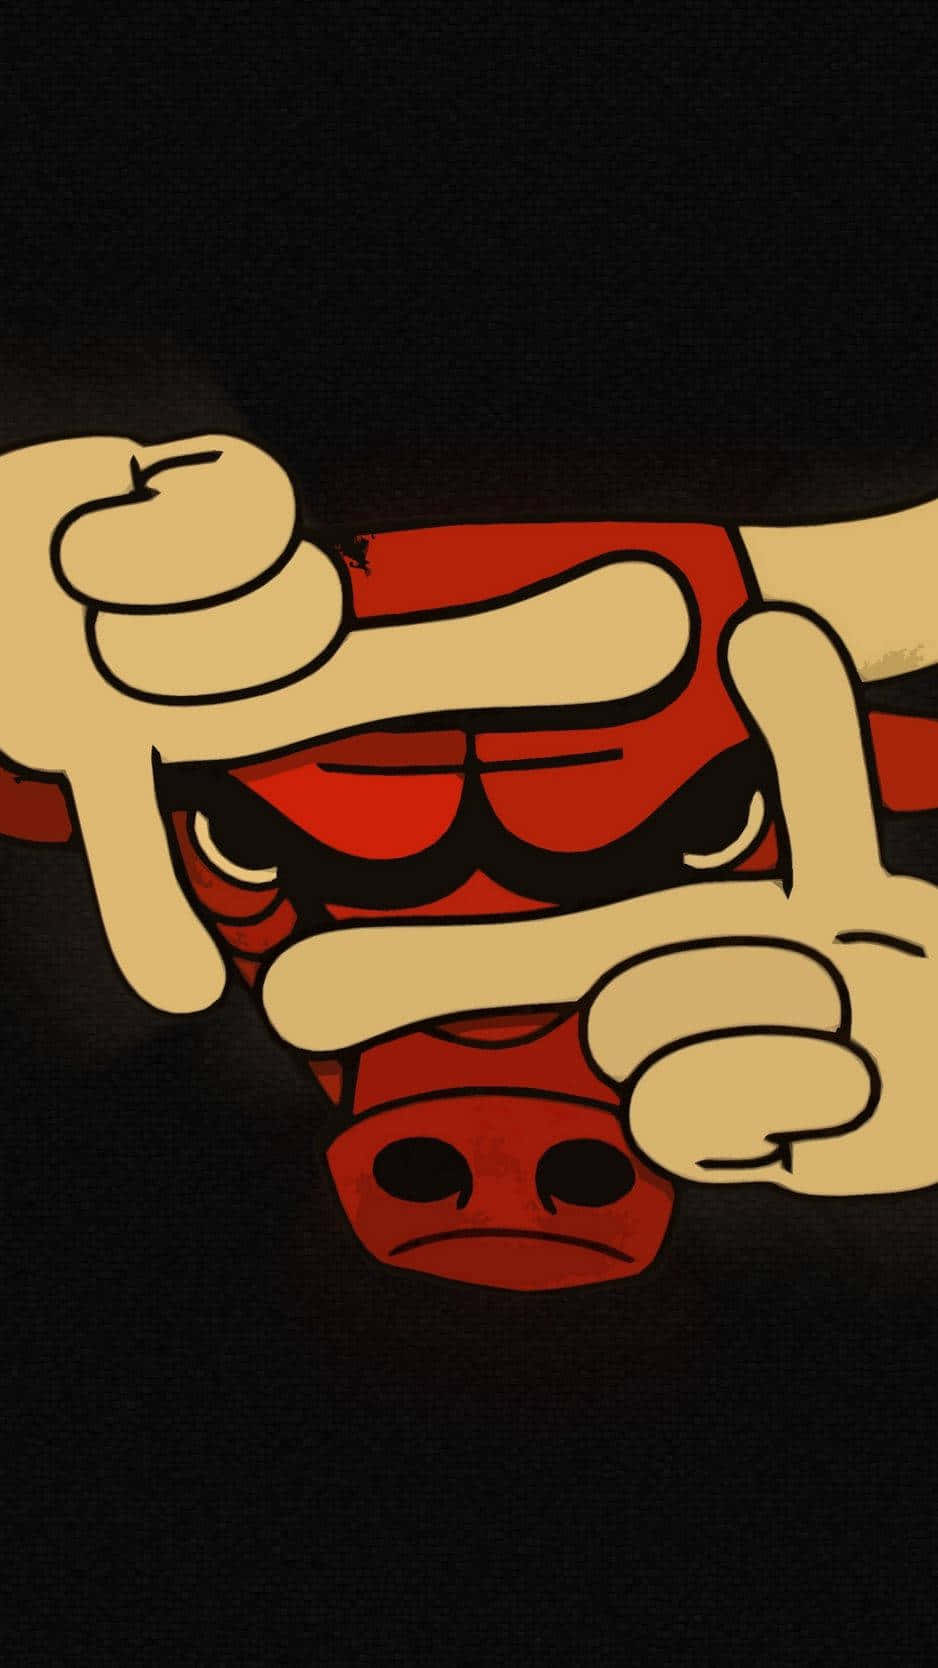 Support Your Team With A Chicago Bulls Themed Iphone Background